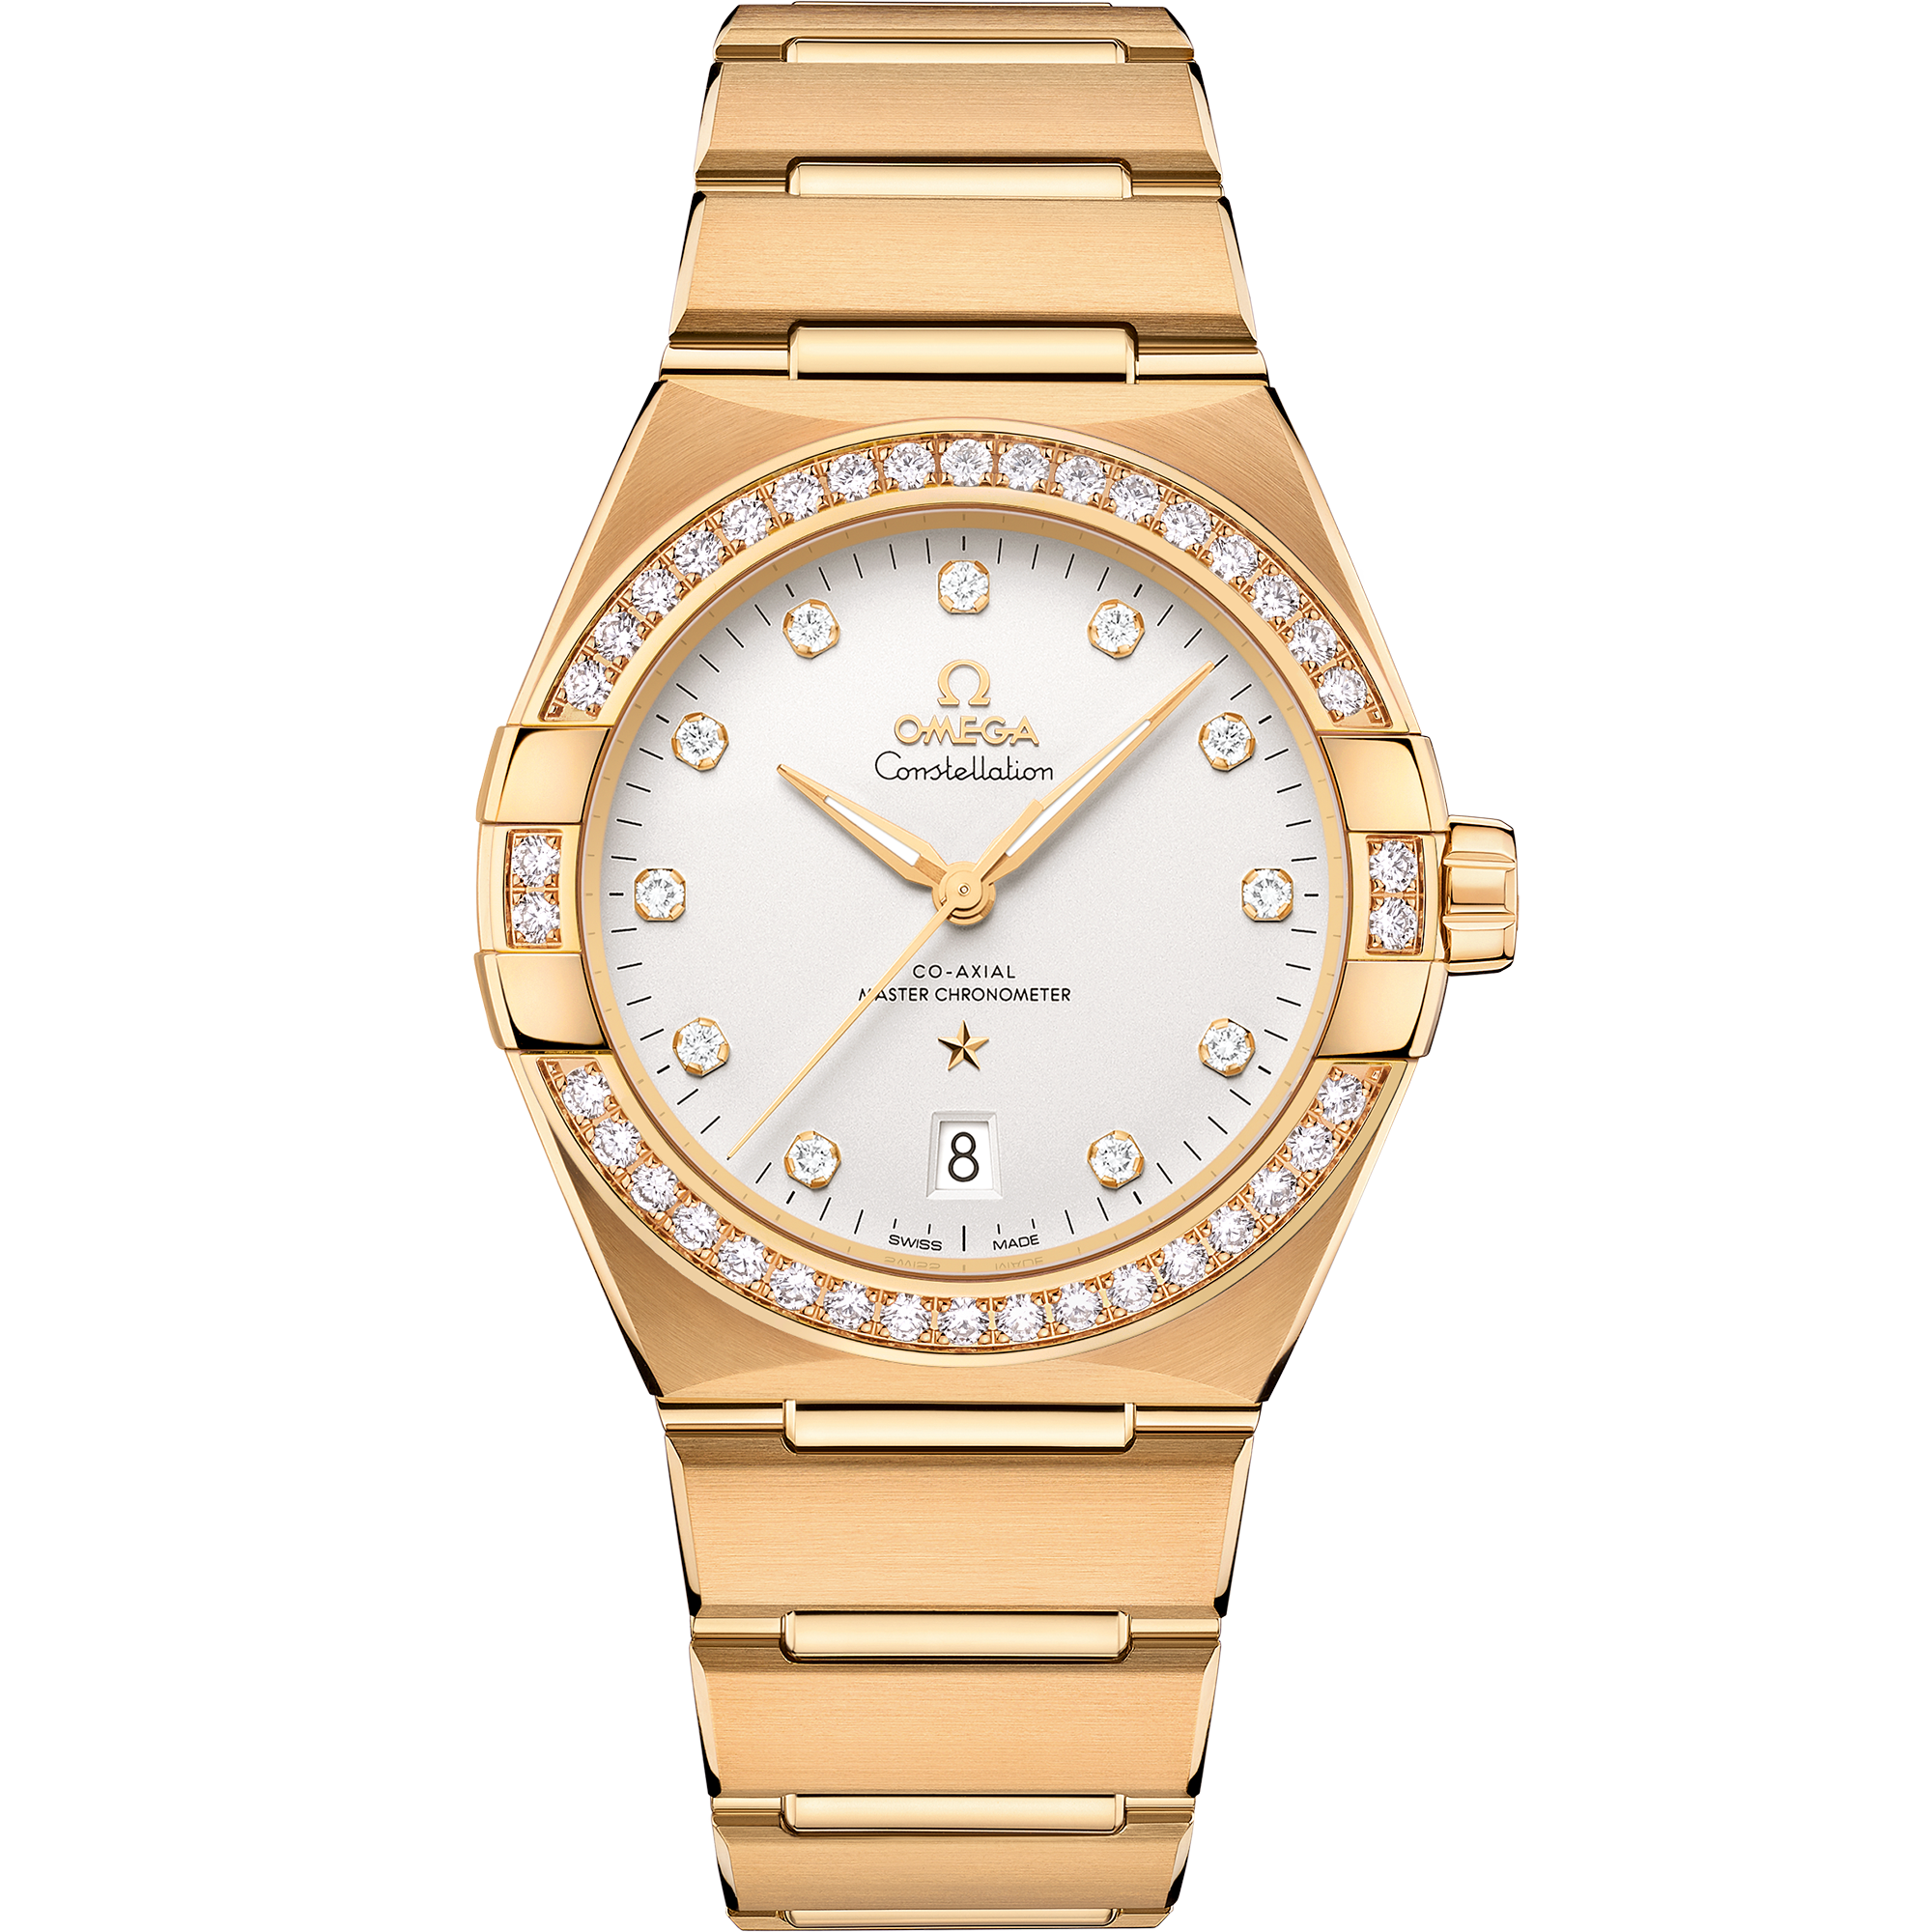 Constellation 39 mm, yellow gold on yellow gold - 131.55.39.20.52.002